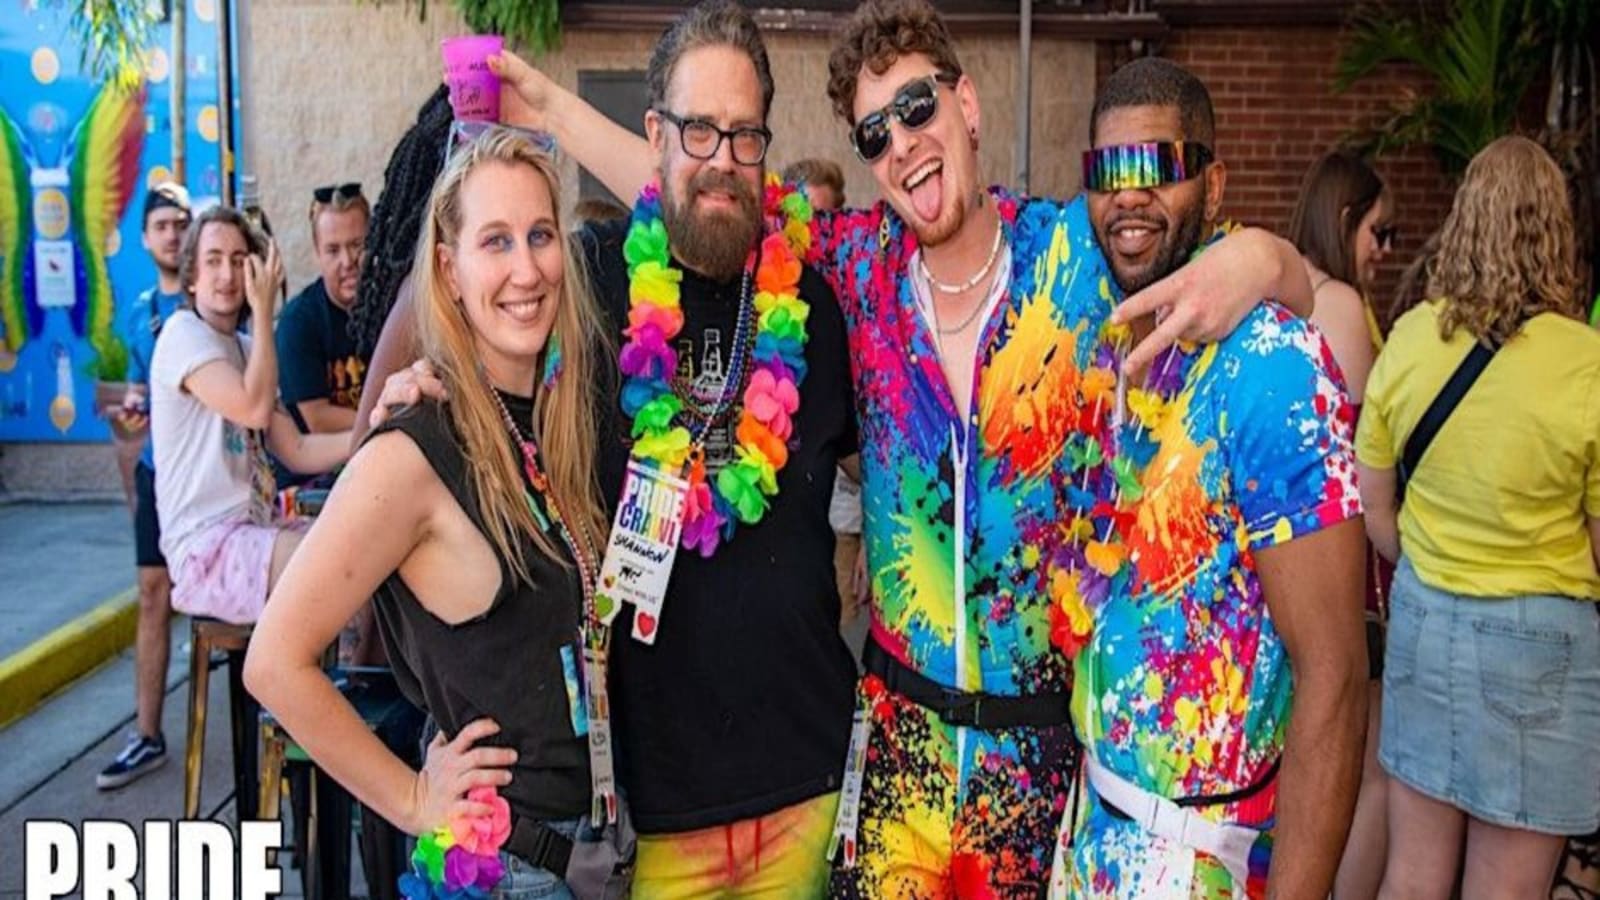 The 7th Annual Official Pride Bar Crawl